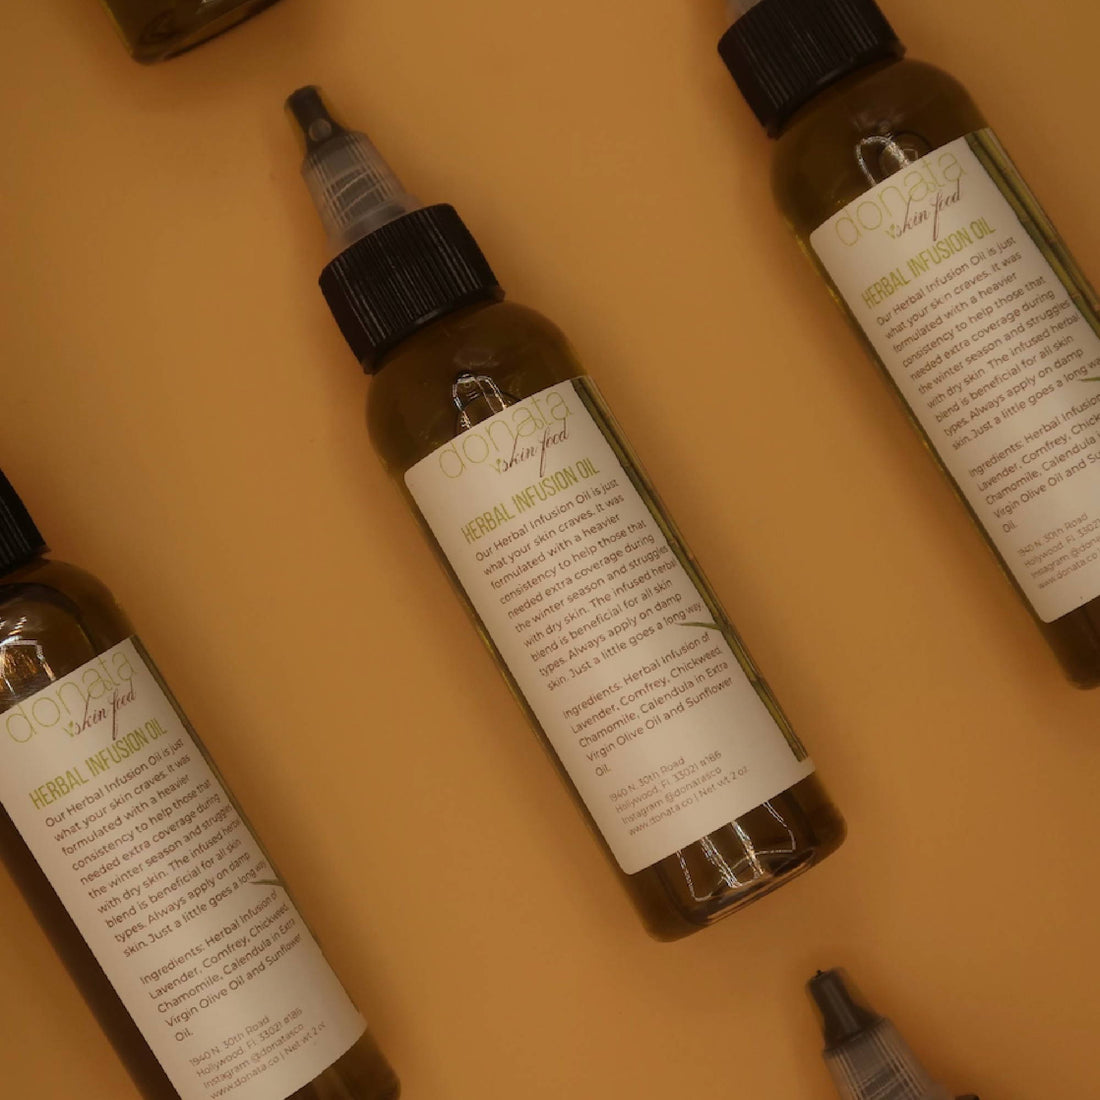 New Product Alert! Donata Skinfood presents the Herbal Infusion Oil.